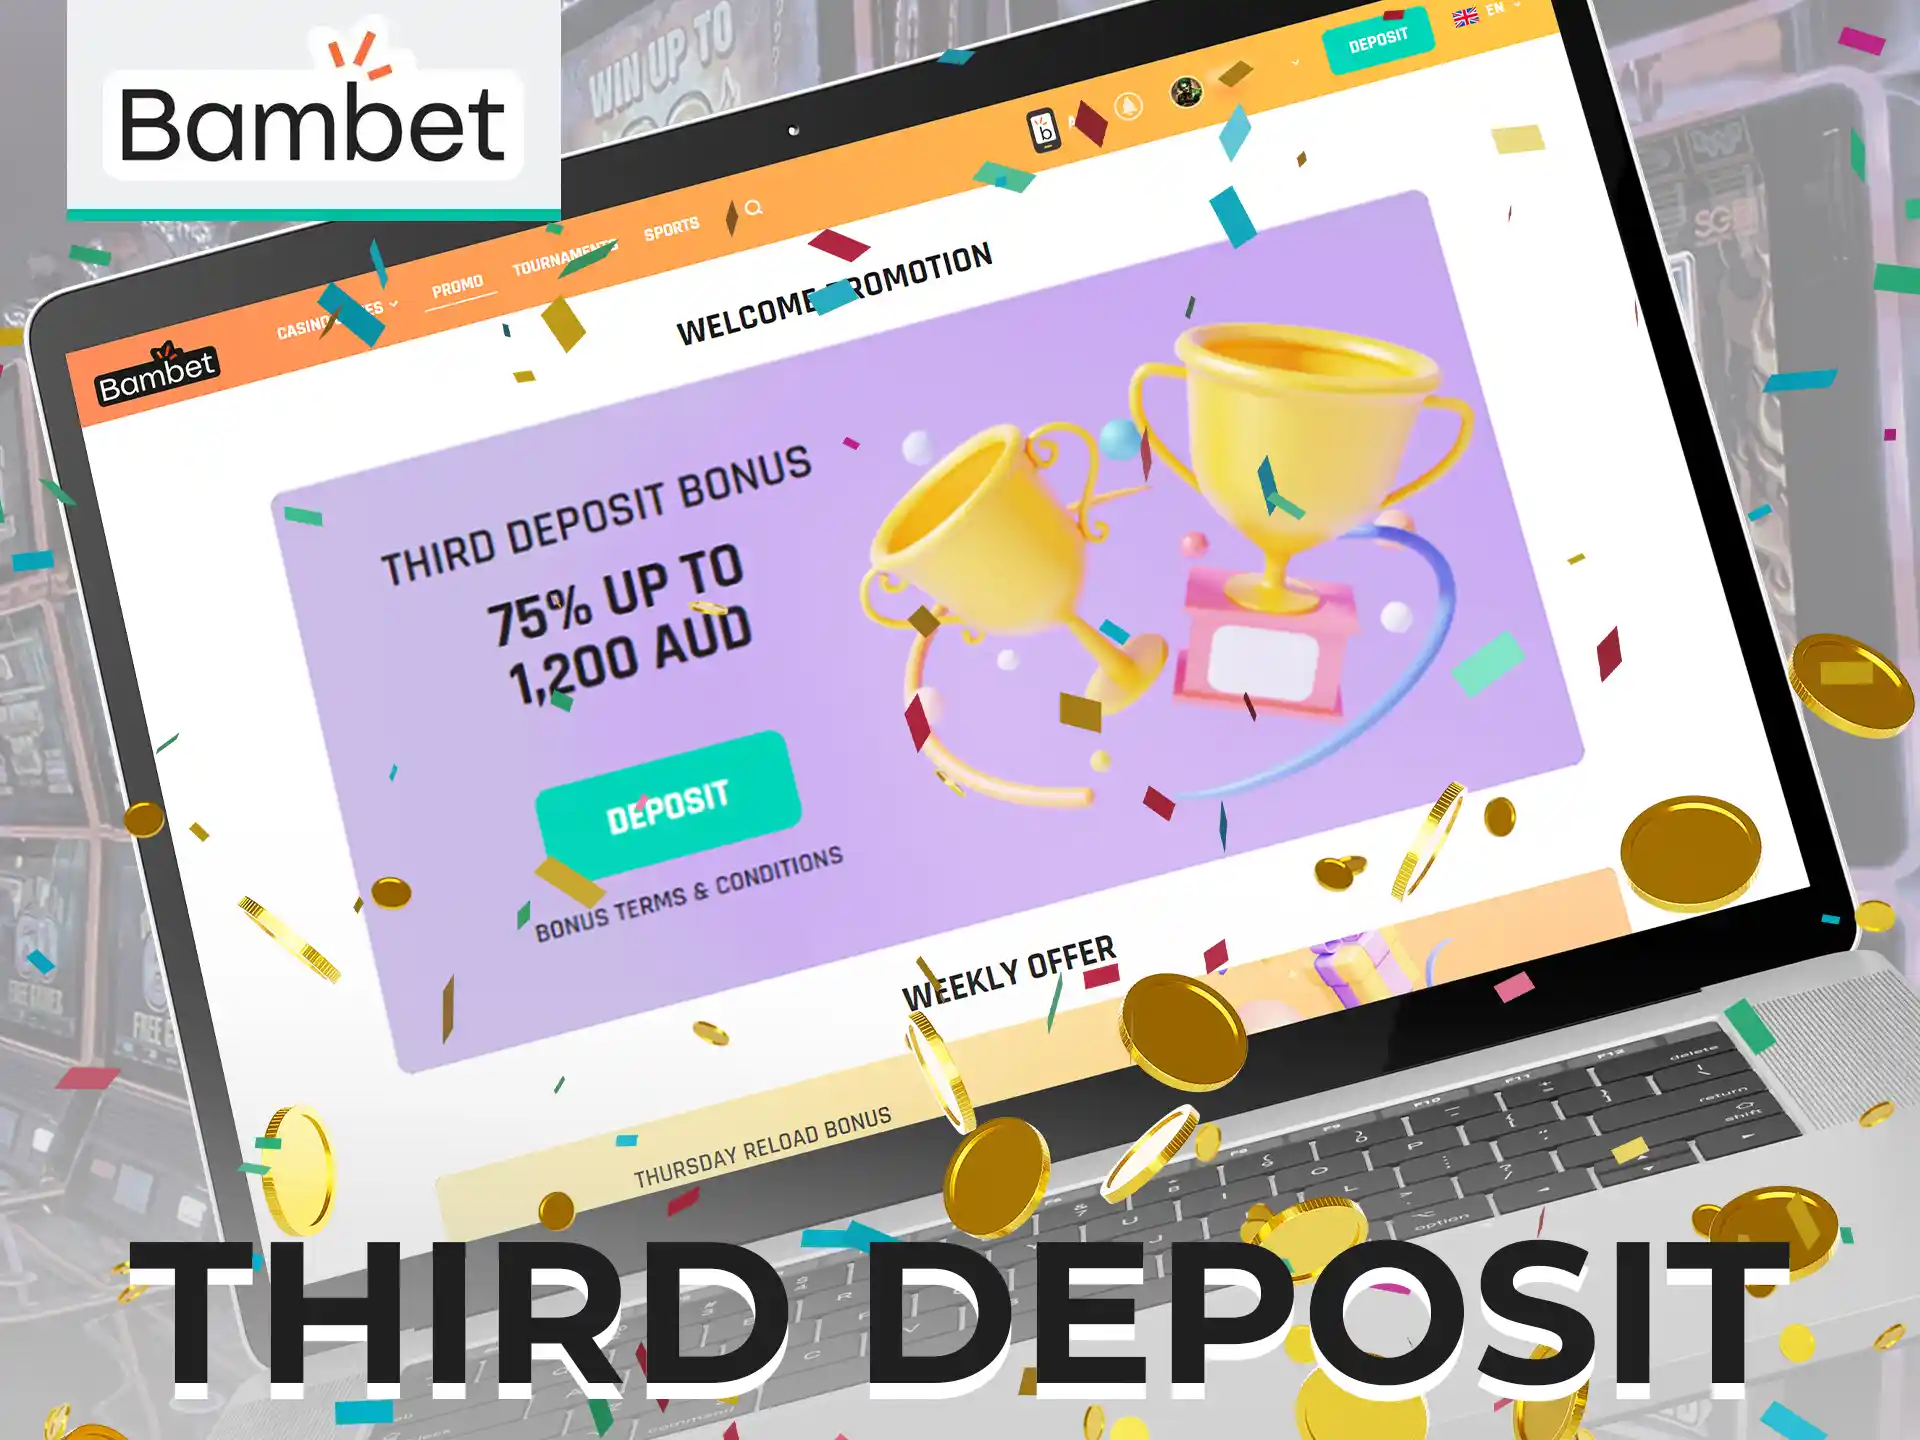 Deposit three times and get 50 free spins and a 75% bonus up to AUD 1,200.